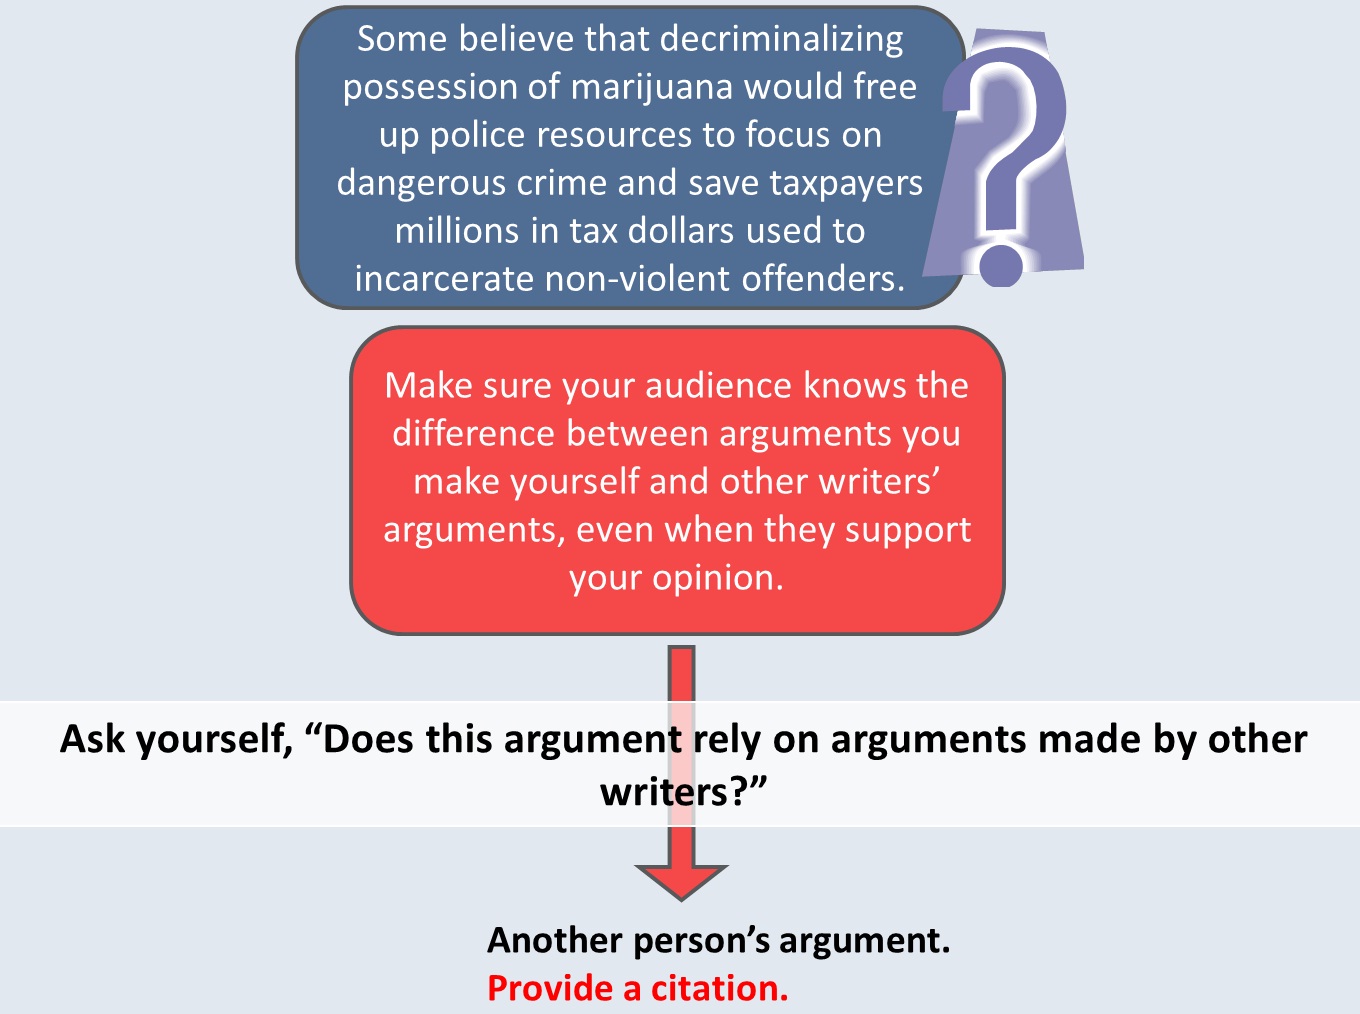 Example sentence. Some believe that decriminalizing possession of marijuana would free up police resources to focus on dangerous crime and save taxpayers millions in tax dollars used to incarcerate non-violent offenders. Analysis. Make sure your audience knows the difference between arguments you make yourself and other writers’ arguments, even when they support your opinion. Ask yourself, “Does this argument rely on arguments made by other writers?” Conclusion. If it relies on another person’s argument, you should provide a citation.